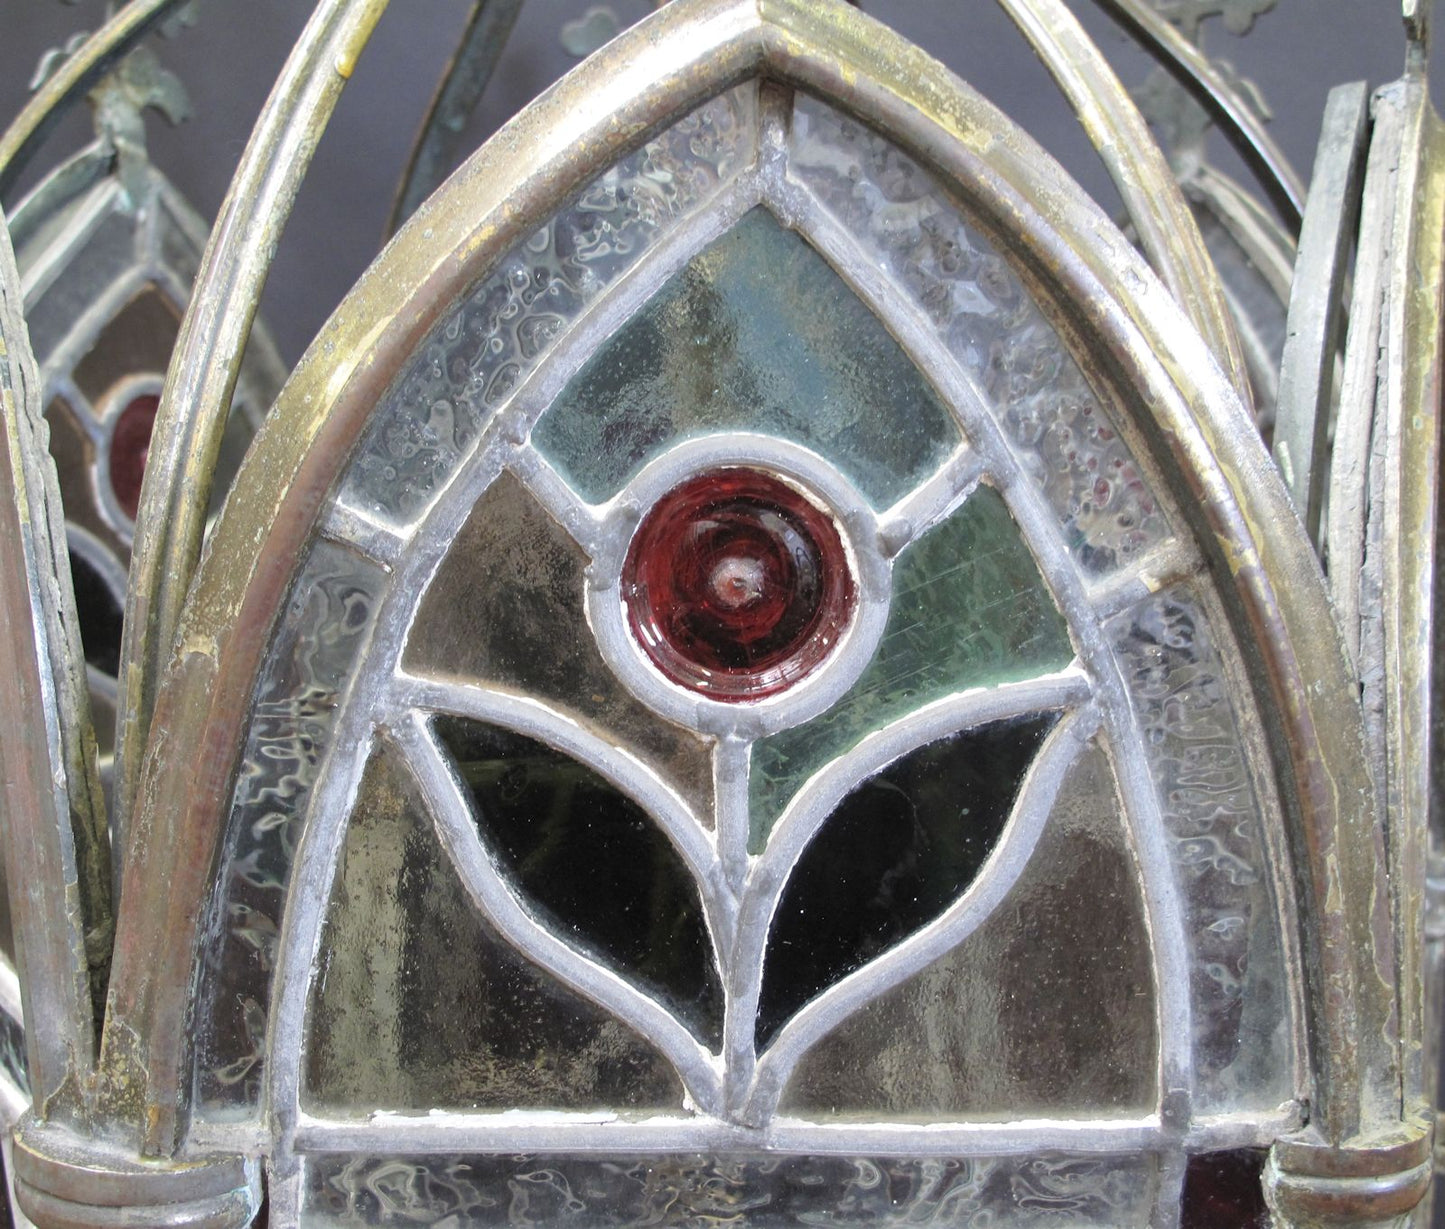 view of intricate lead panes of glass